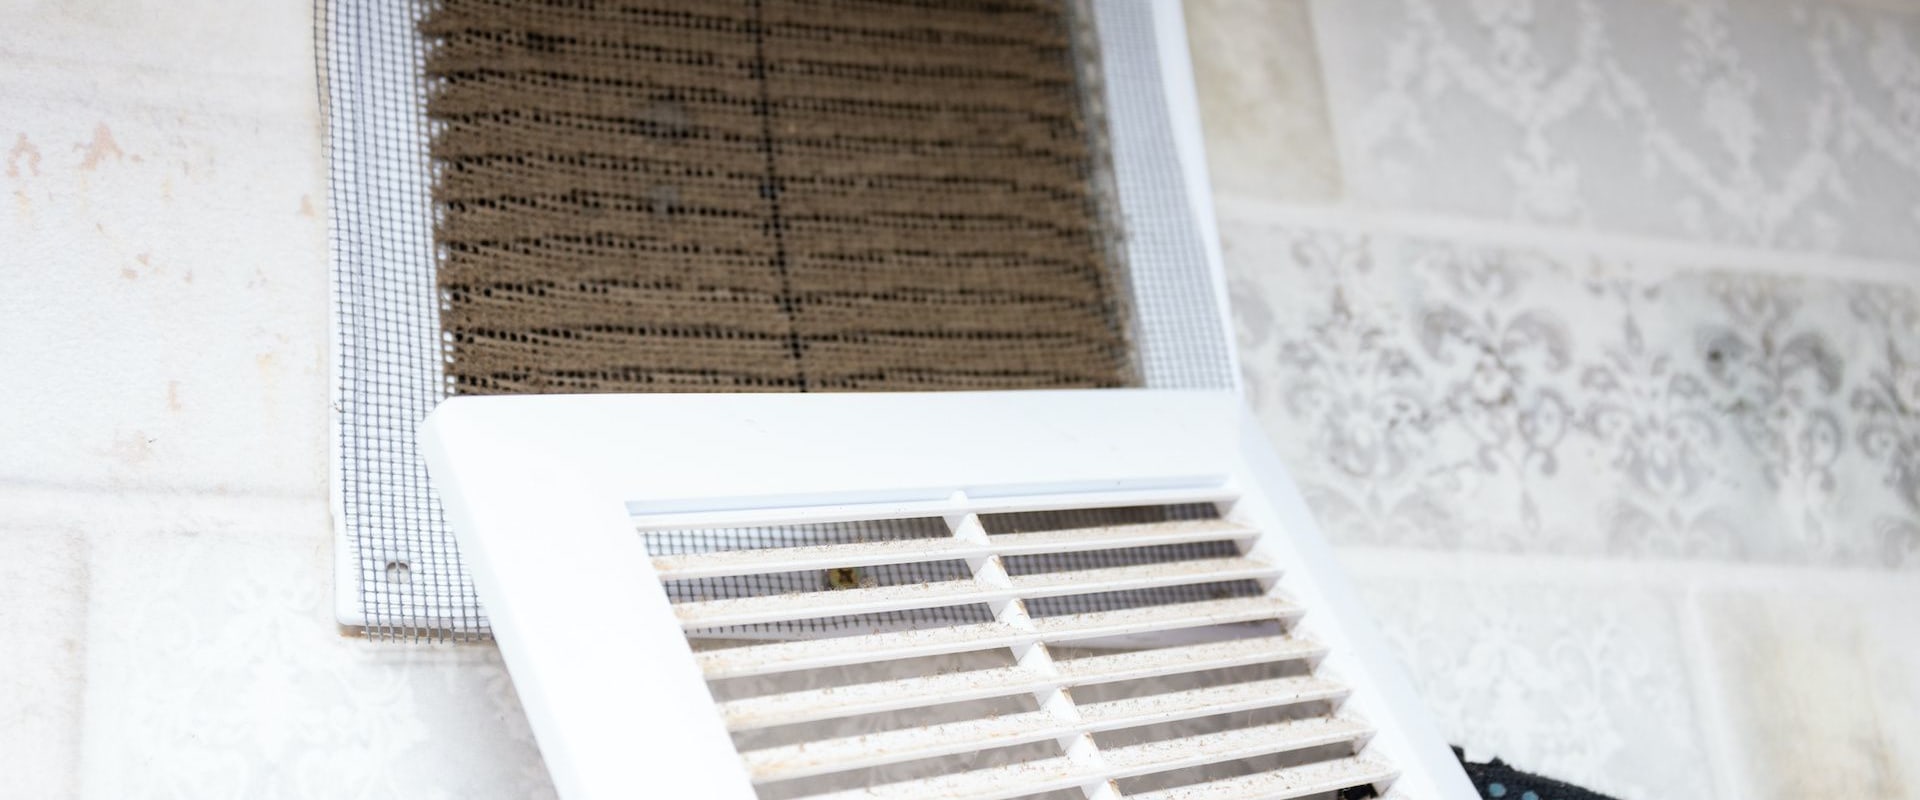 Do Dryer Vent Cleaning Companies Offer Free Estimates or Consultations?